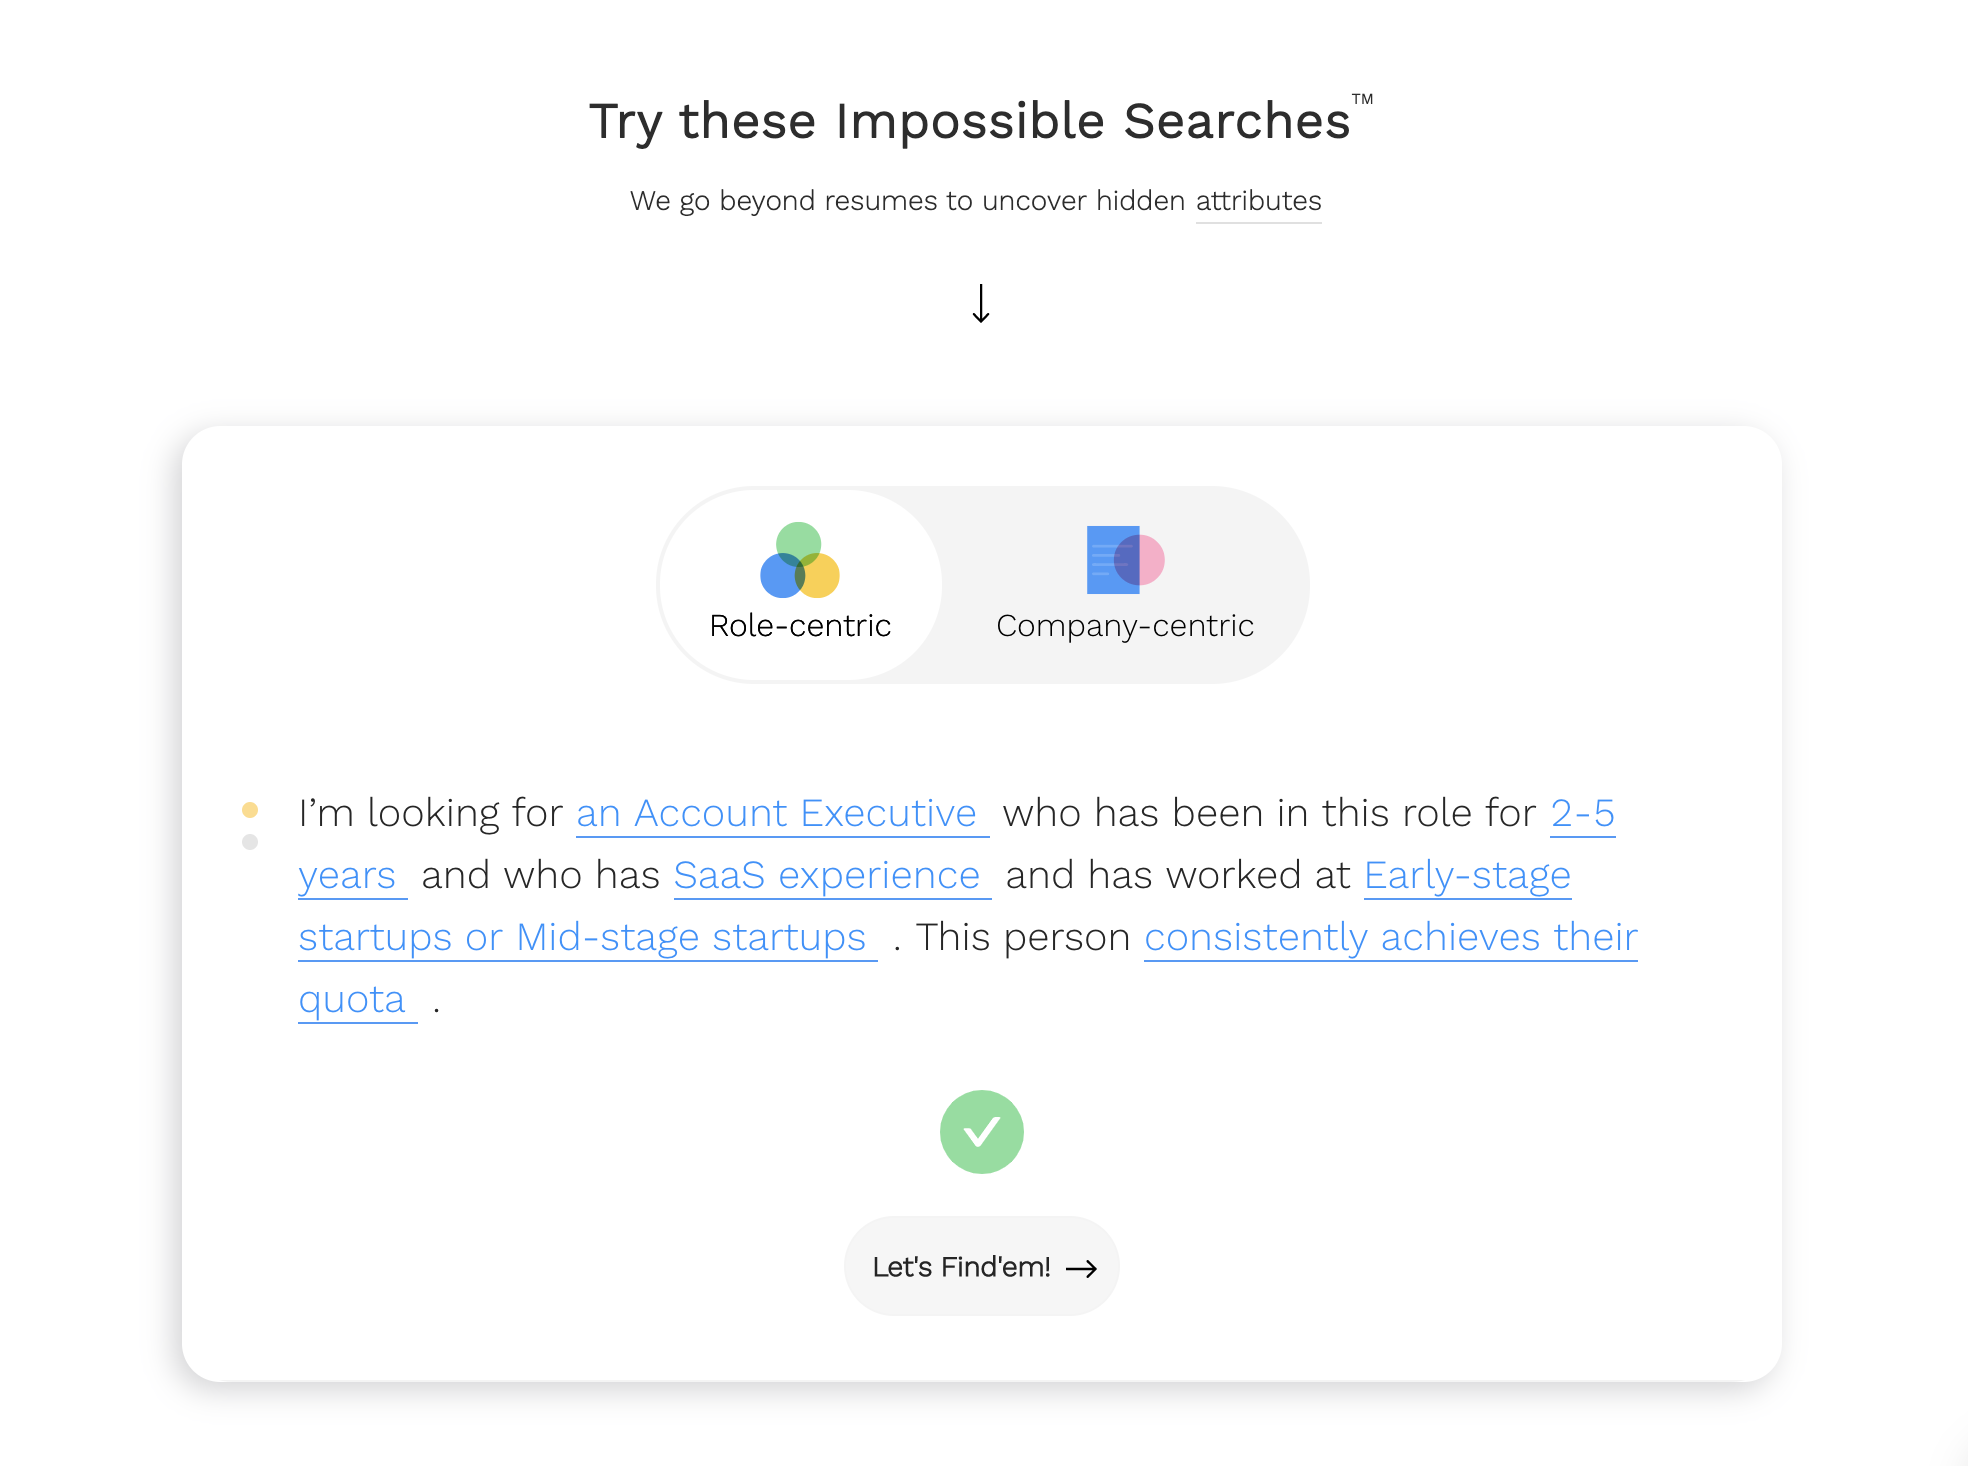 Findem Impossible Search